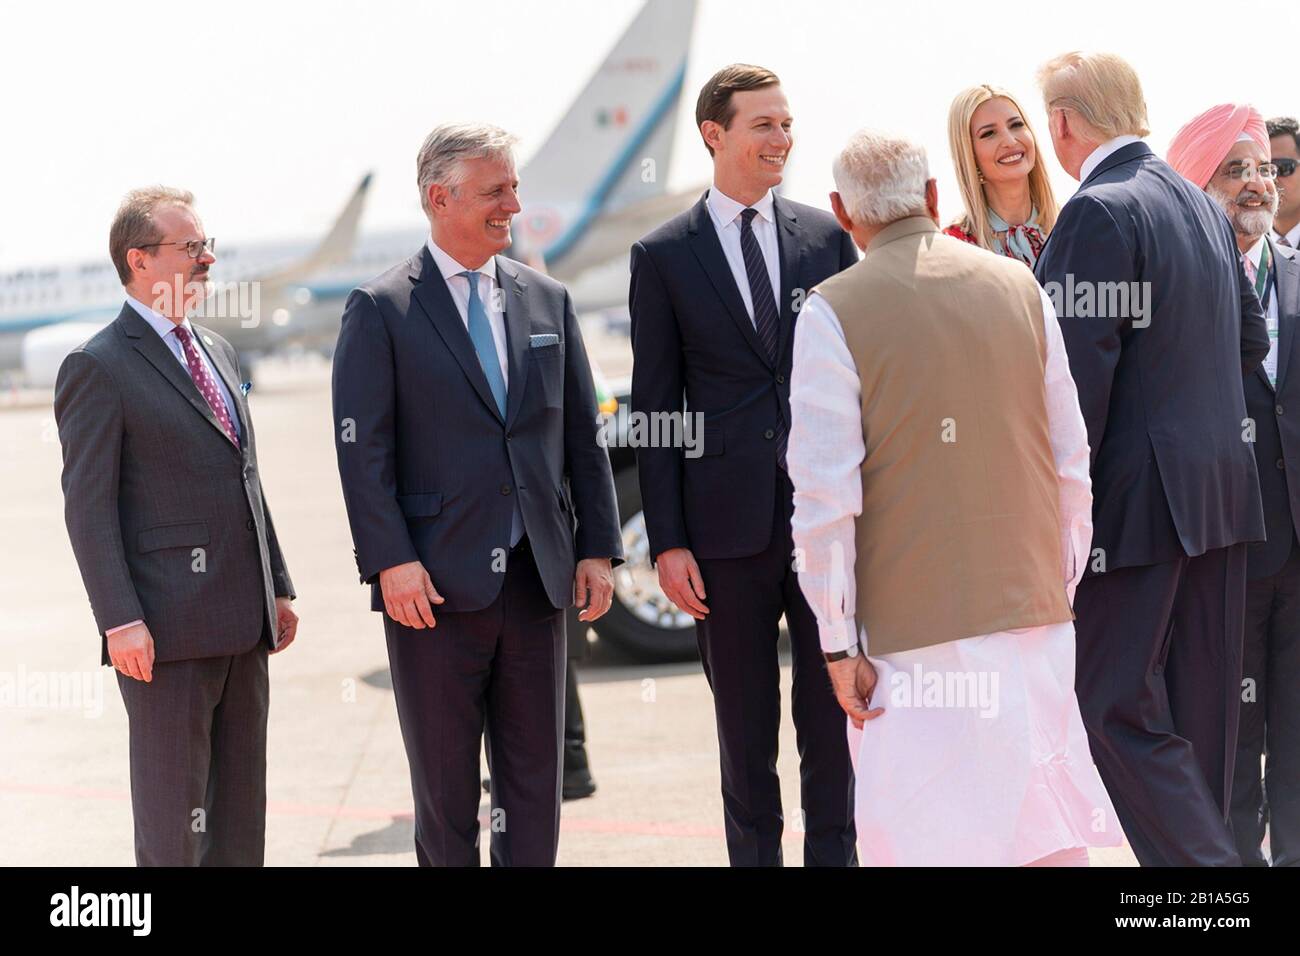 Ahmedabad, India. 24th Feb, 2020. U.S. President Donald Trump introduces Indian Prime Minister Narendra Modi, to members of his delegation on arrival at Sardar Vallabhbhai Patel International Airport February 24, 2020 in Ahmedabad, Gujarat, India. Standing from left to right are: National Security Advisor Robert O'Brien, son-in-law Jared Kushner and first daughter Ivanka Trump. Credit: Shealah Craighead/White House Photo/Alamy Live News Stock Photo